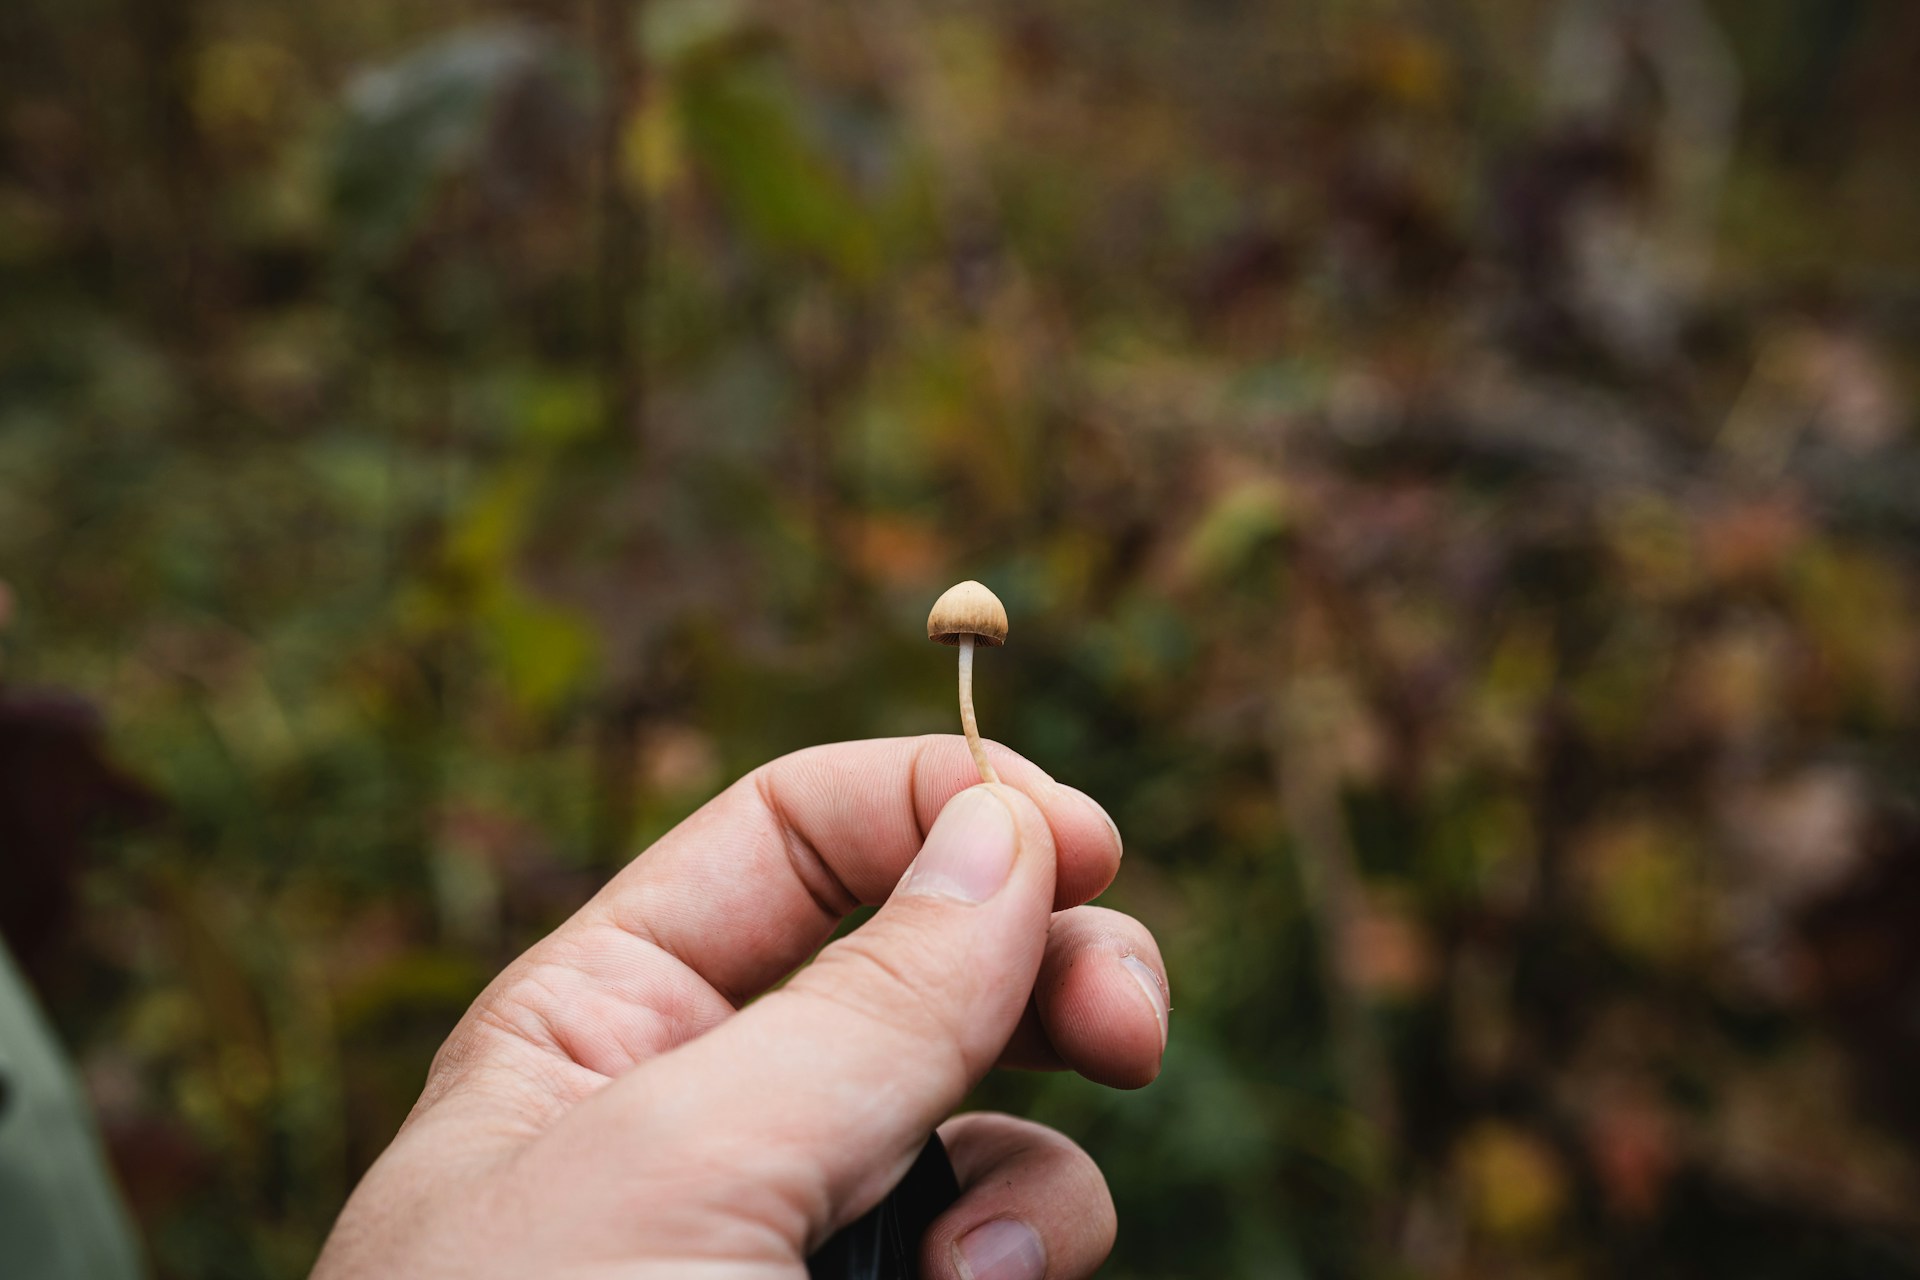 5 Best Practices for Safe Magic Mushroom Use